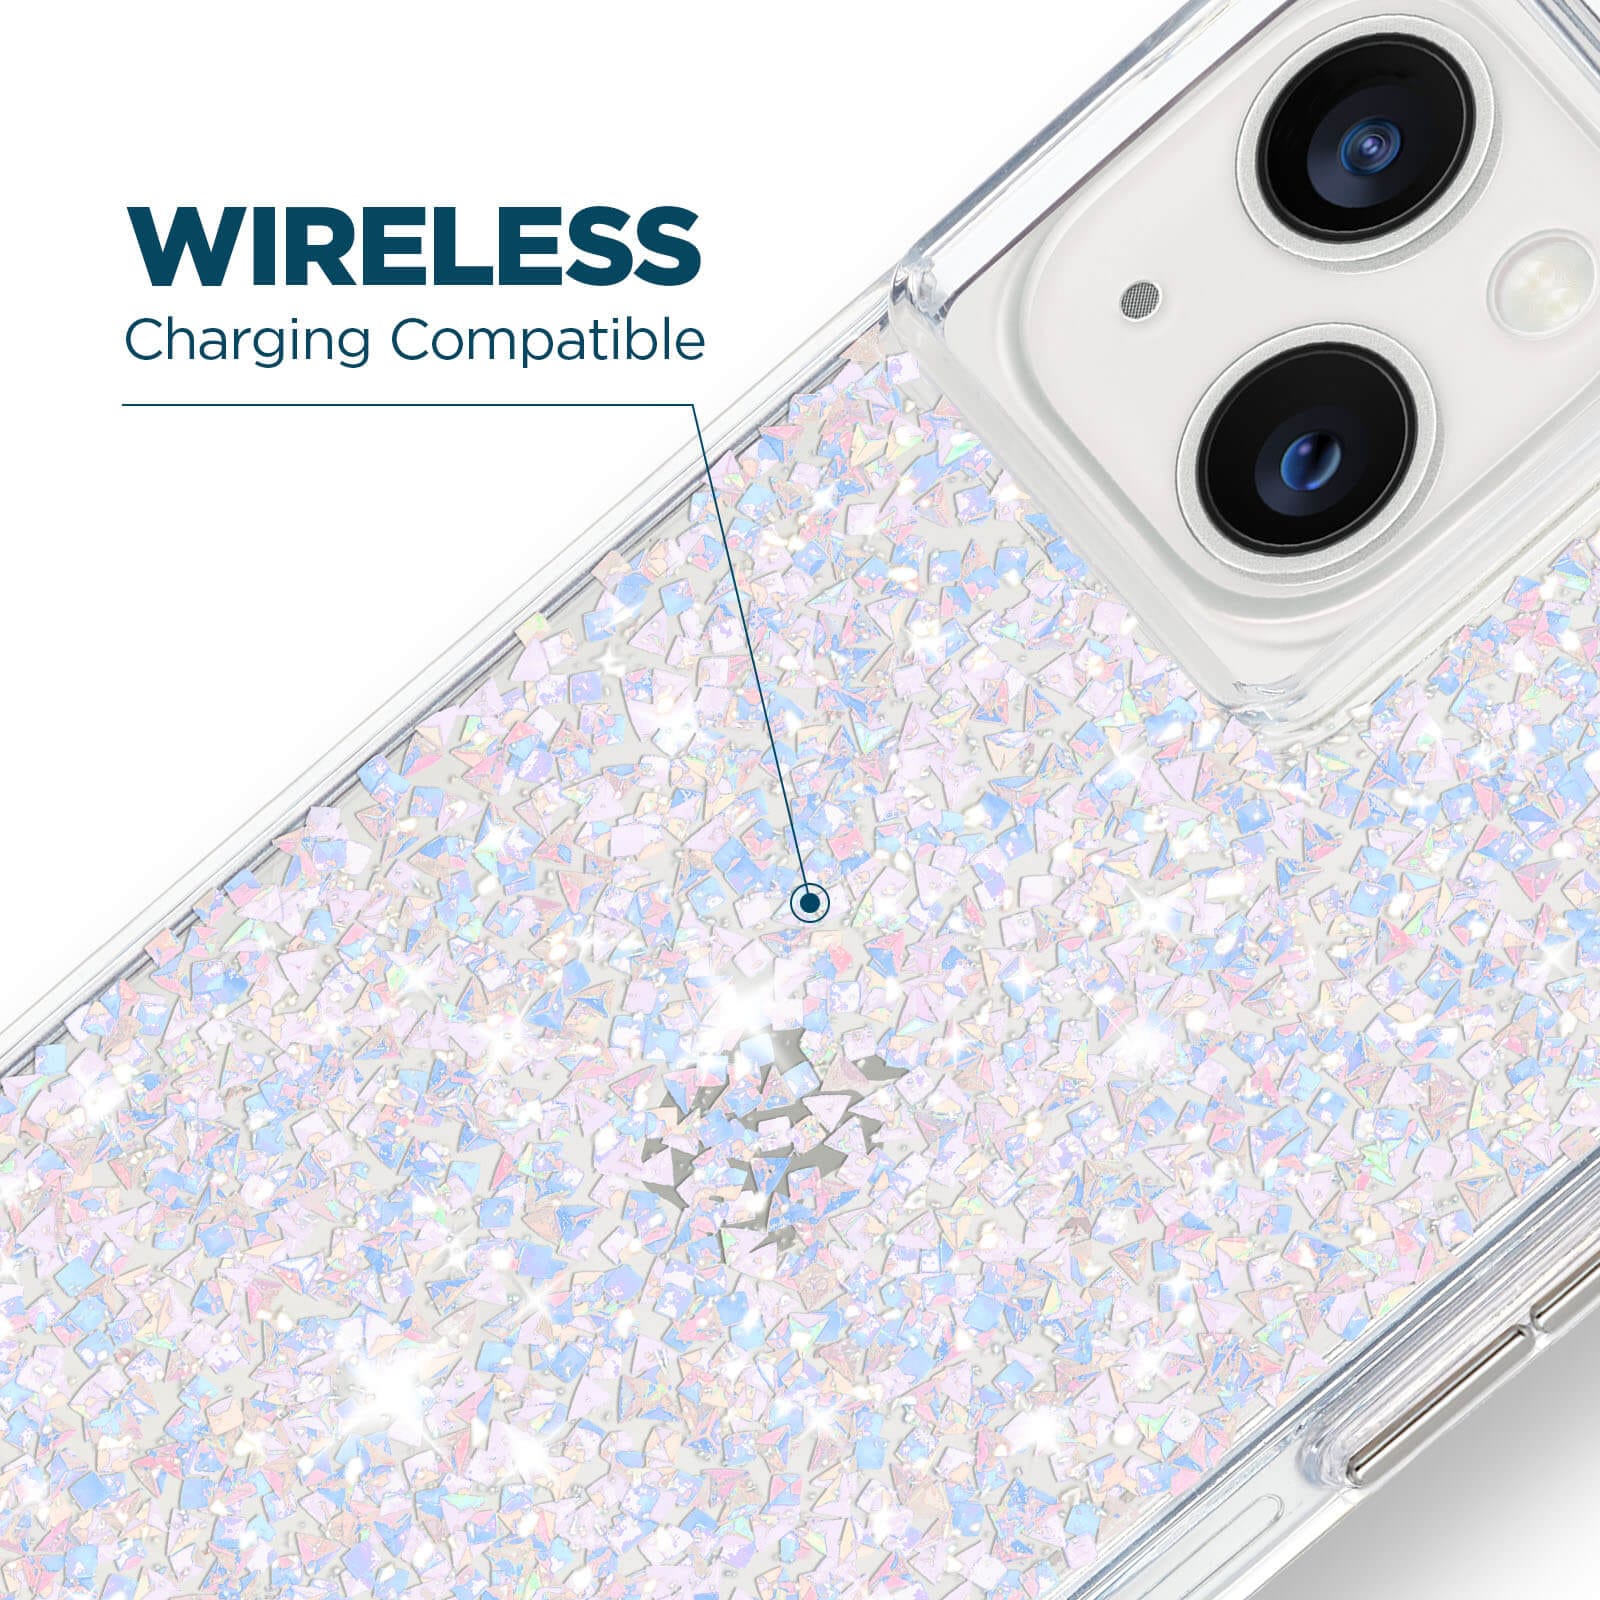 Wireless charging compatible. color::Twinkle Diamond